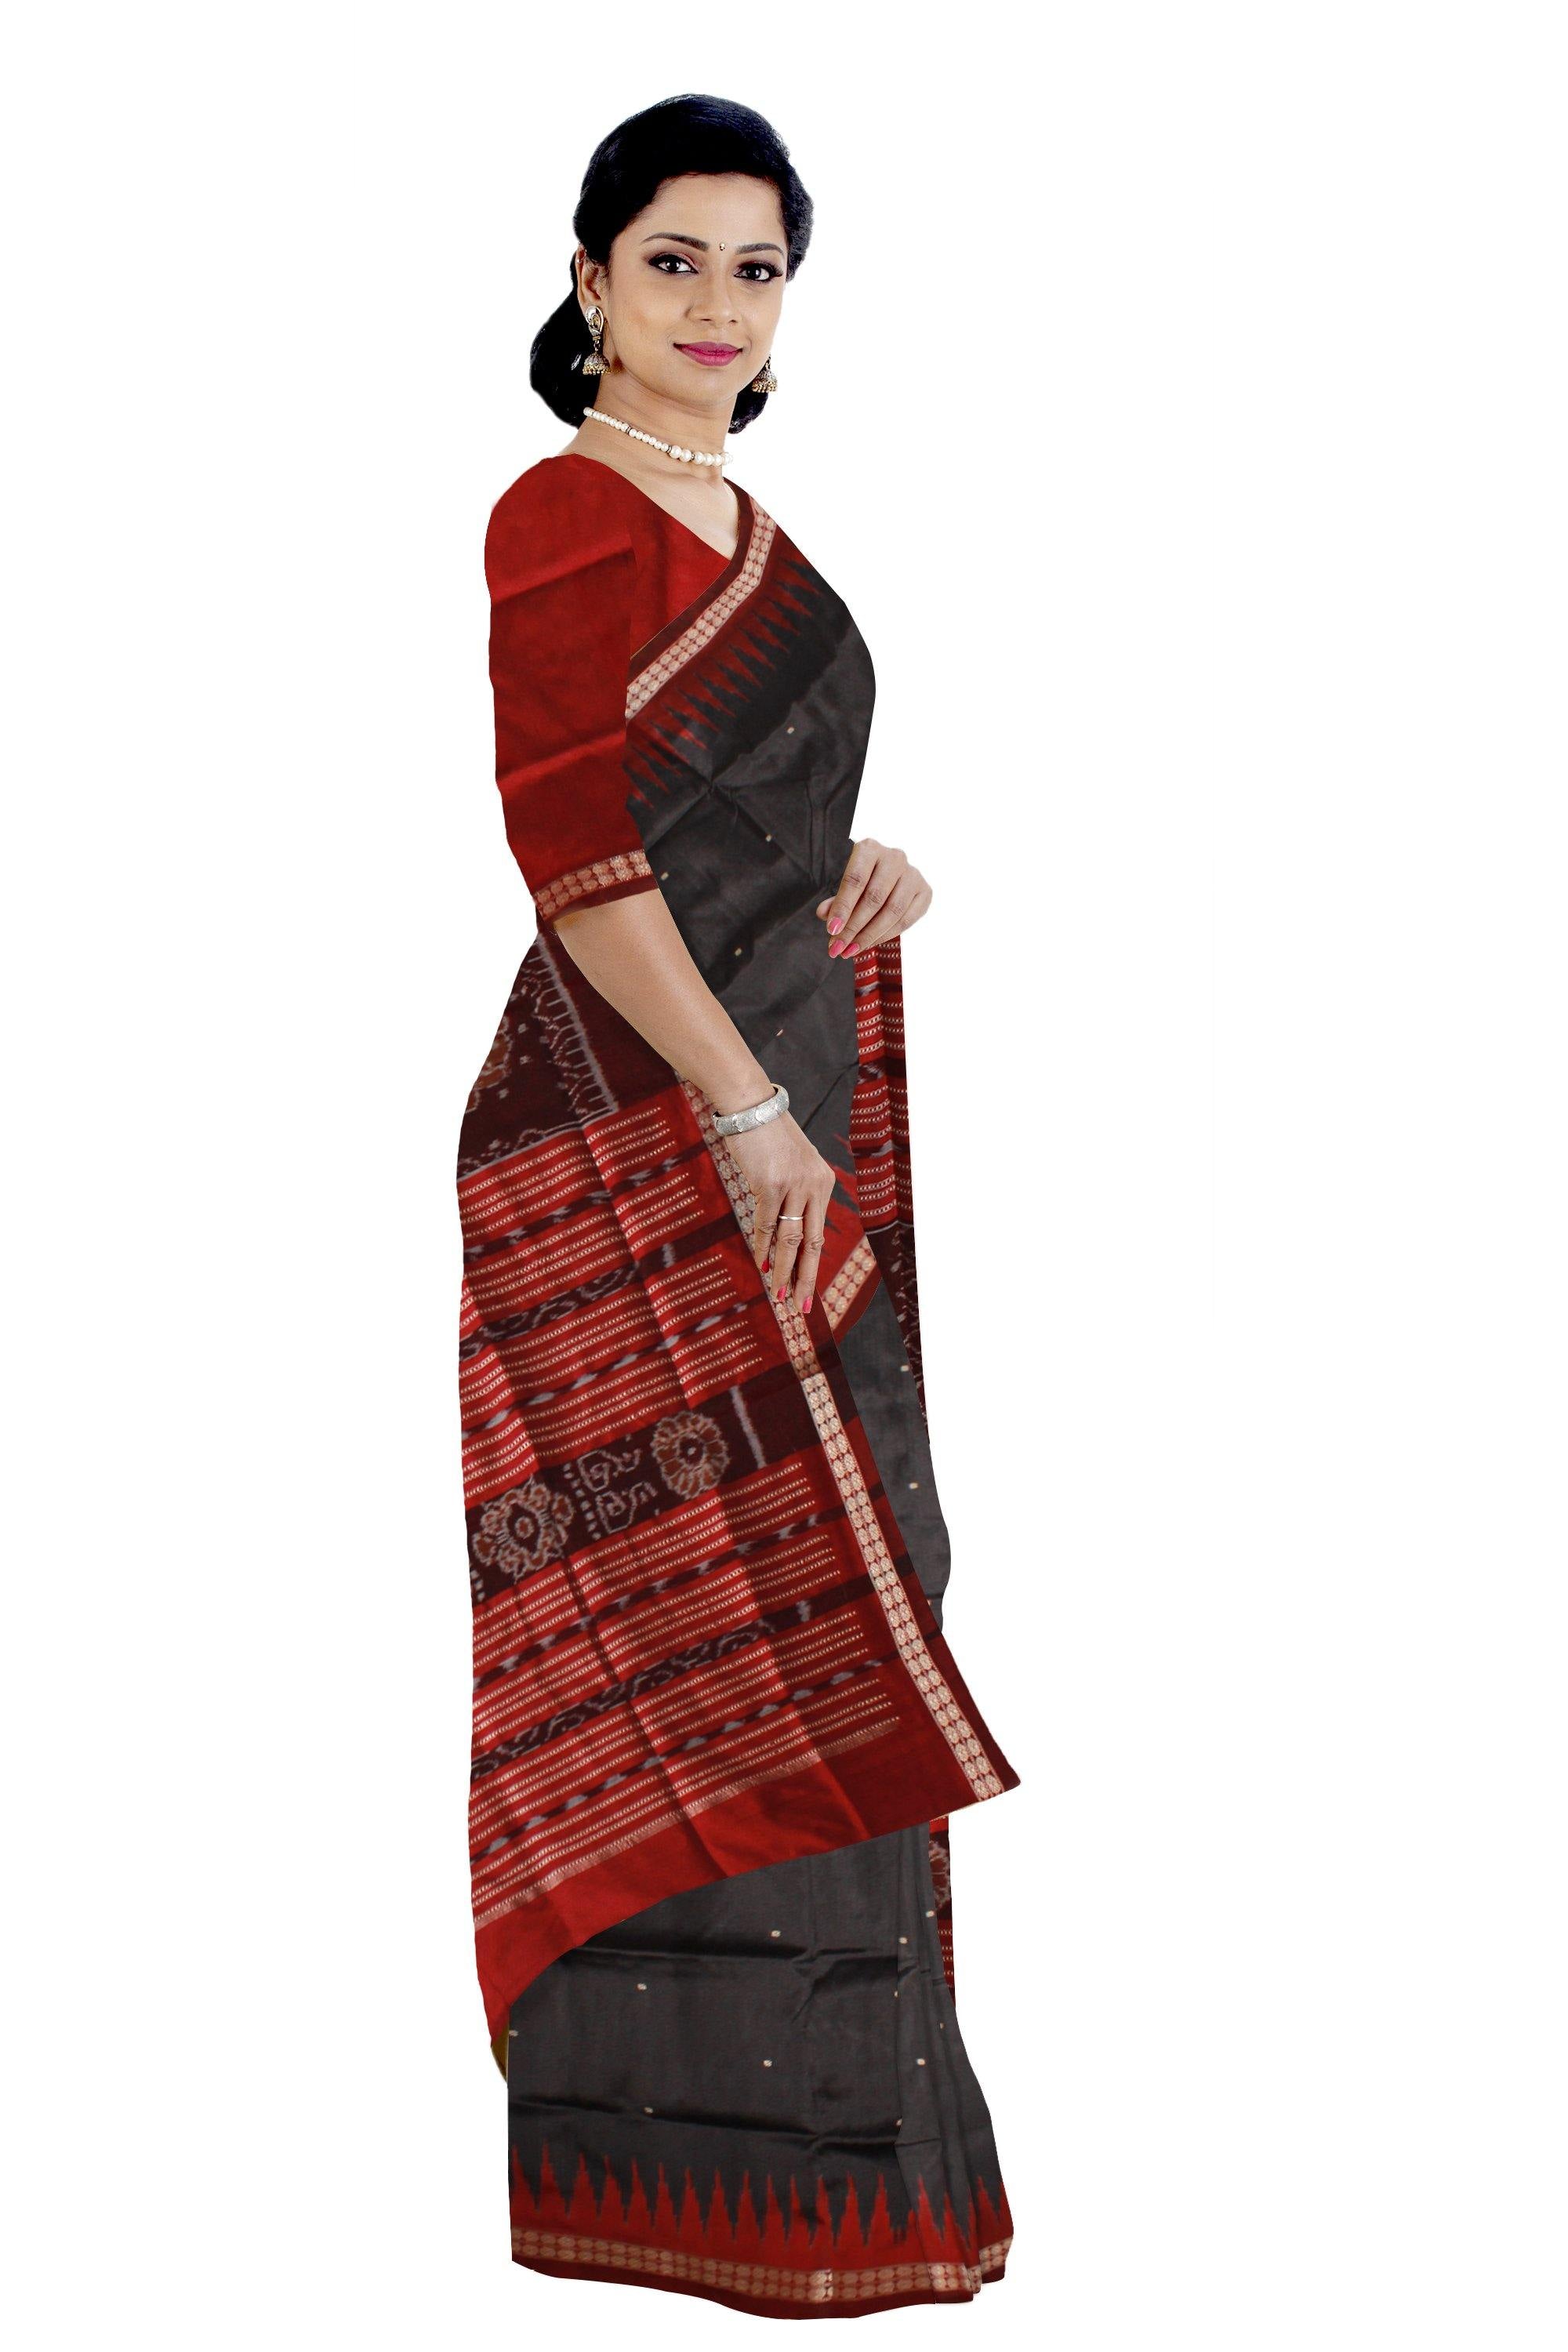 Black color buti pattern pata saree with red border available with  blouse piece - Koshali Arts & Crafts Enterprise